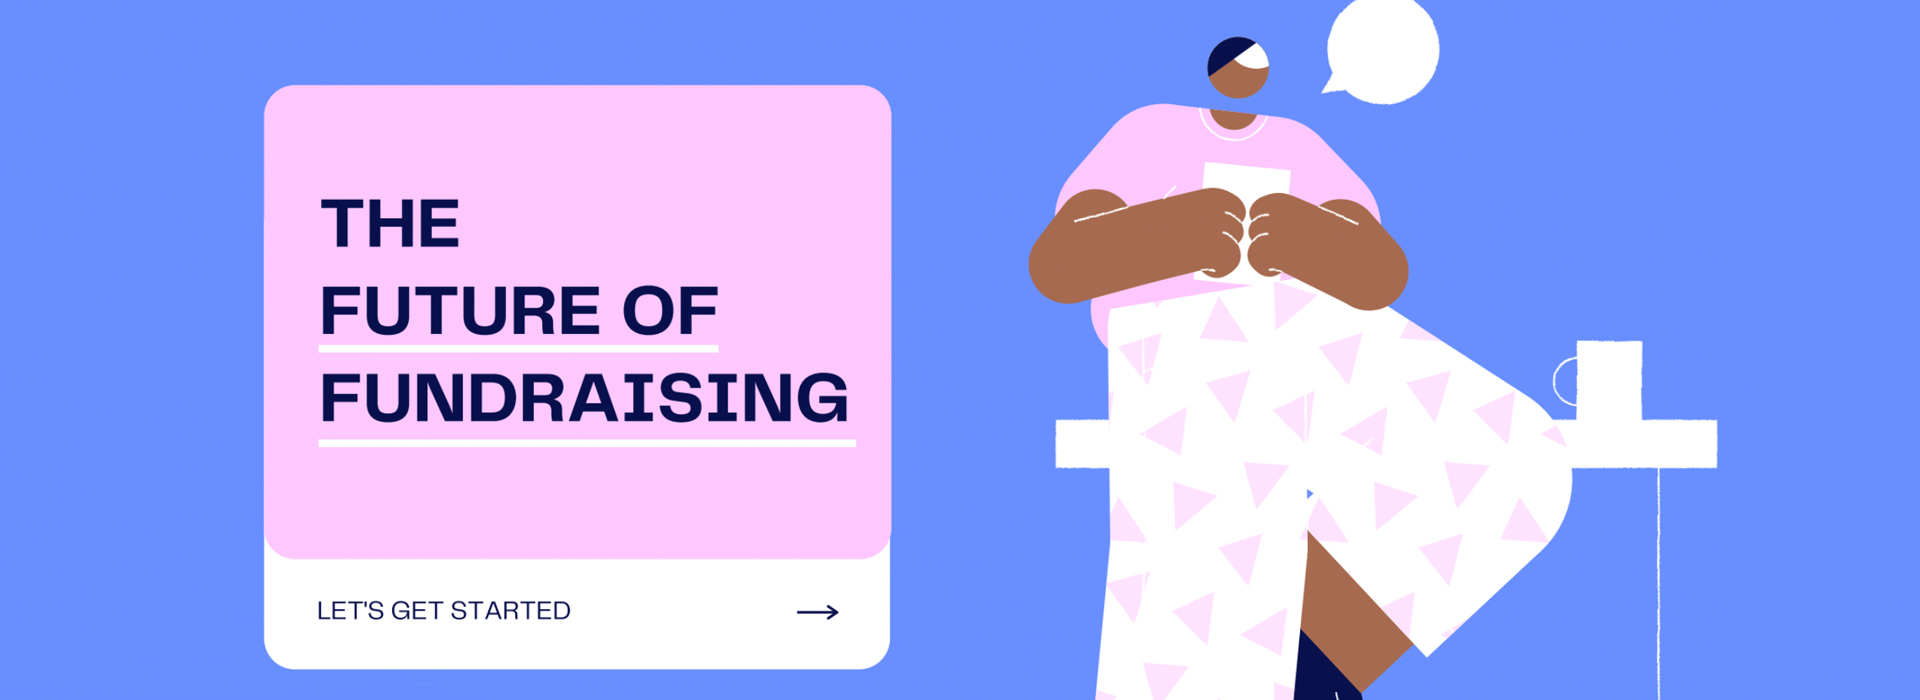 The future of fundraising